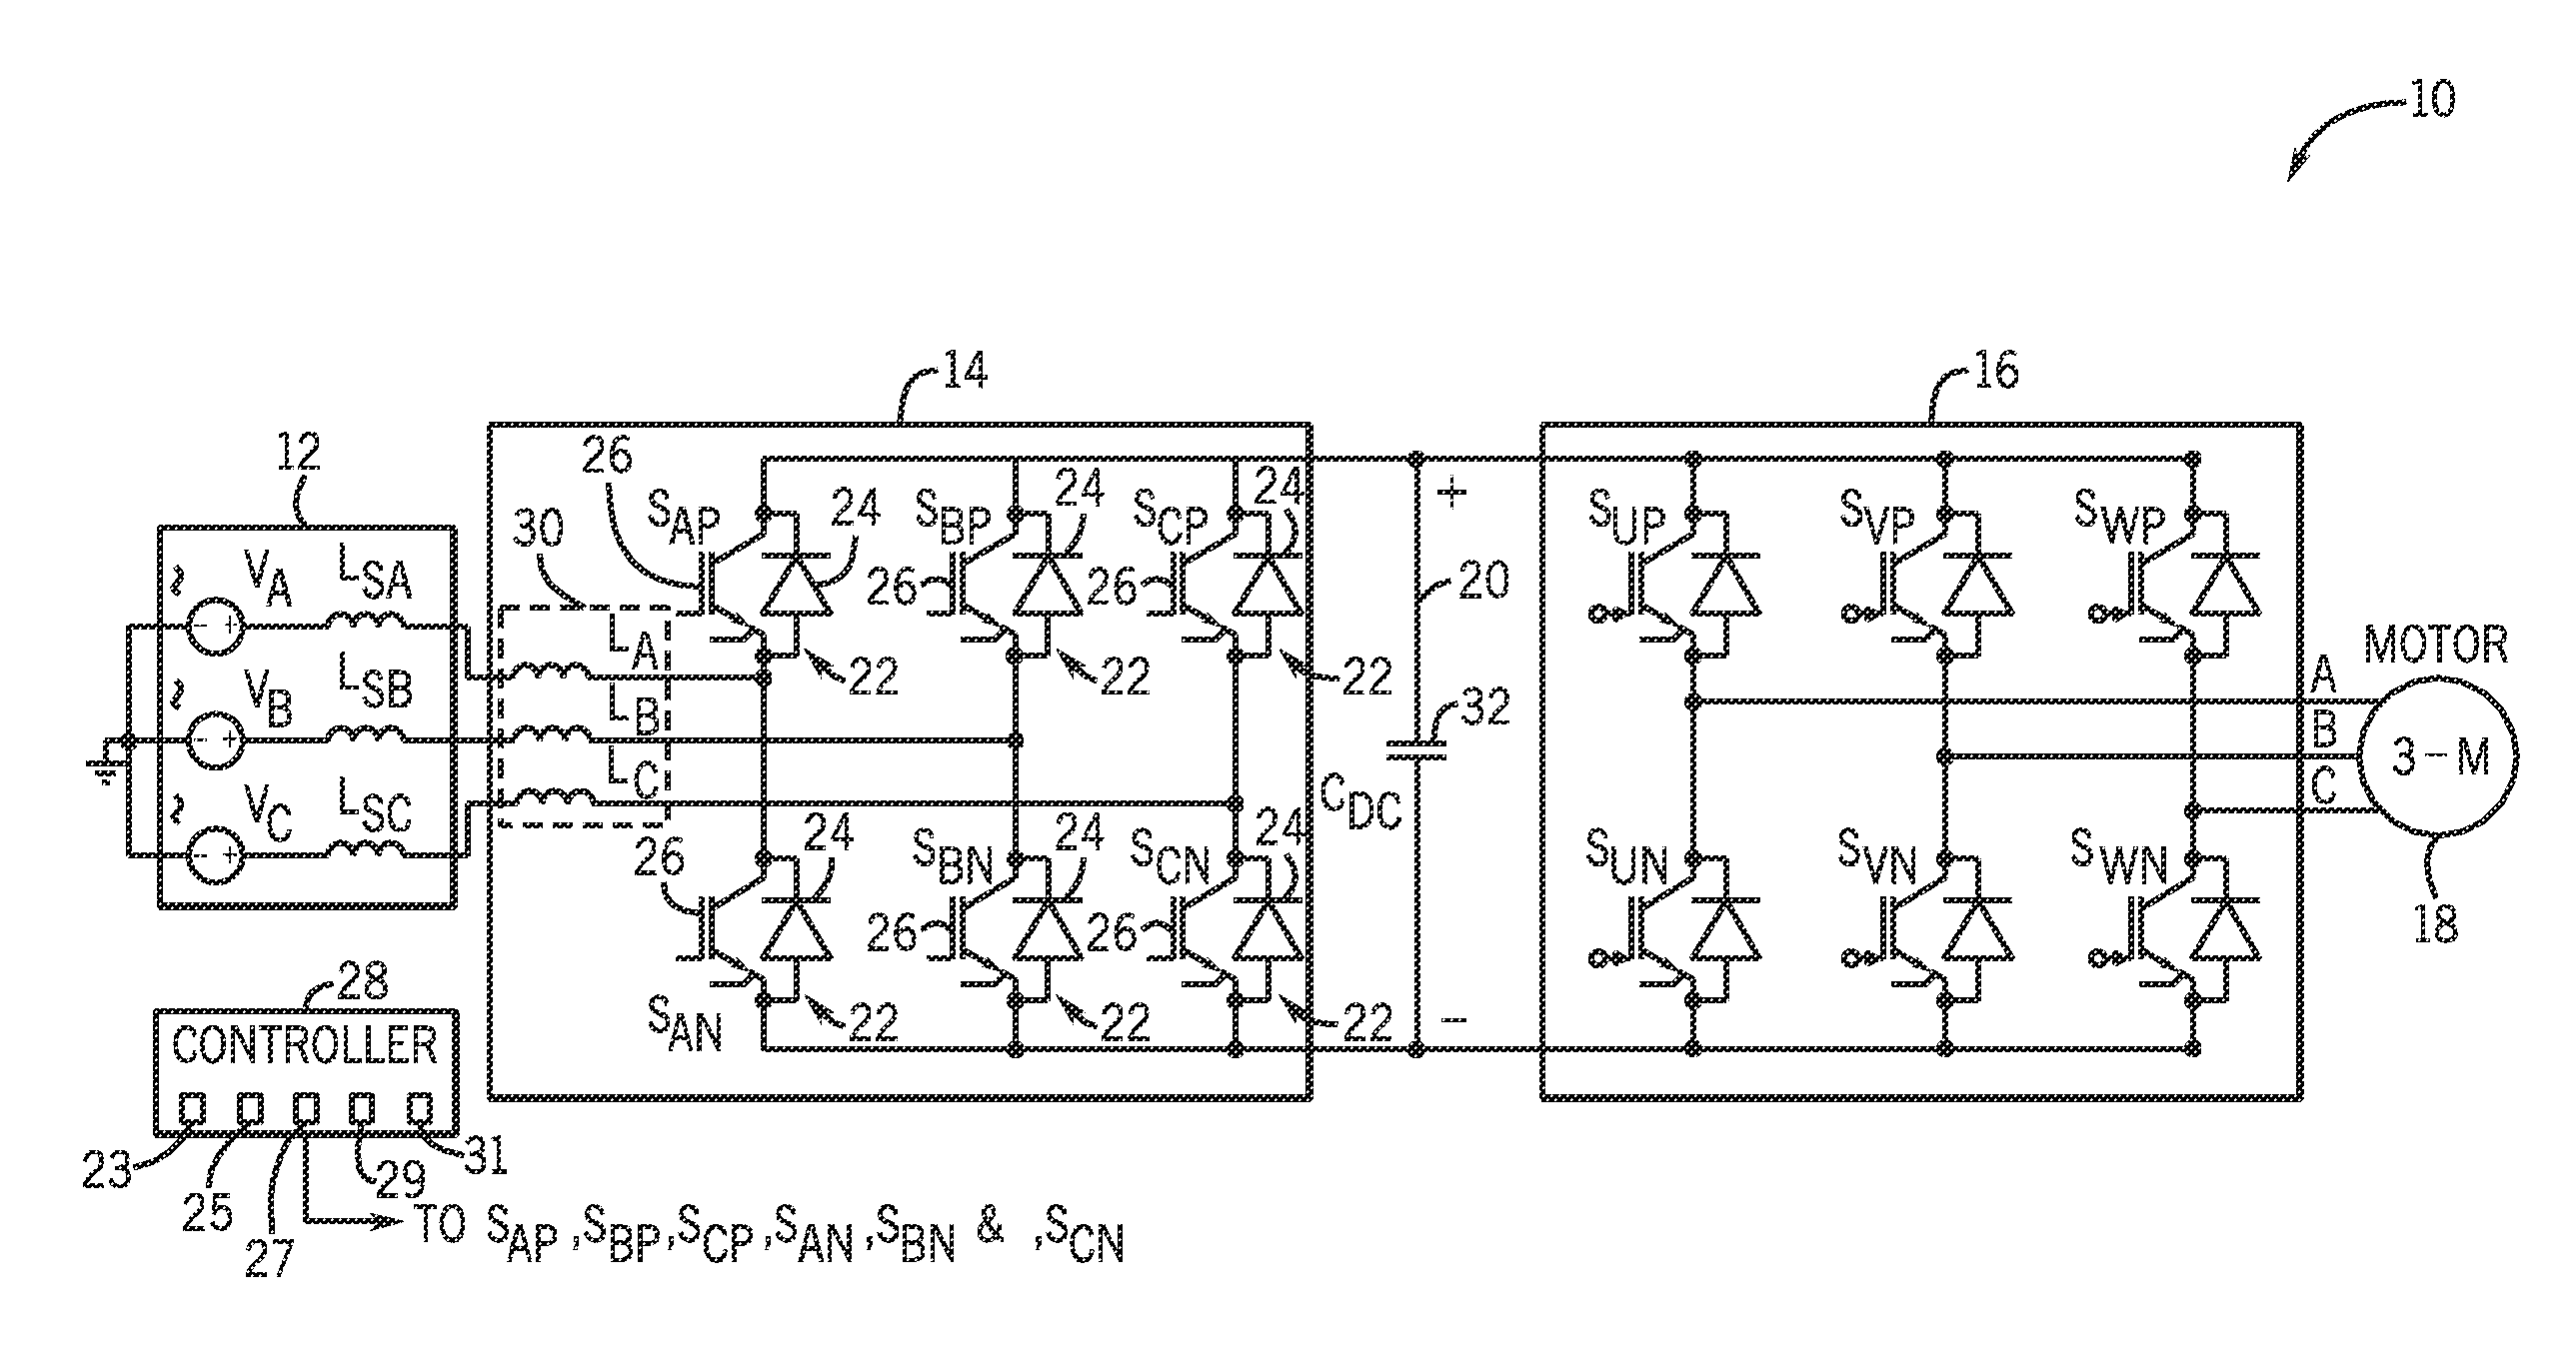 Single phase operation of a three-phase drive system